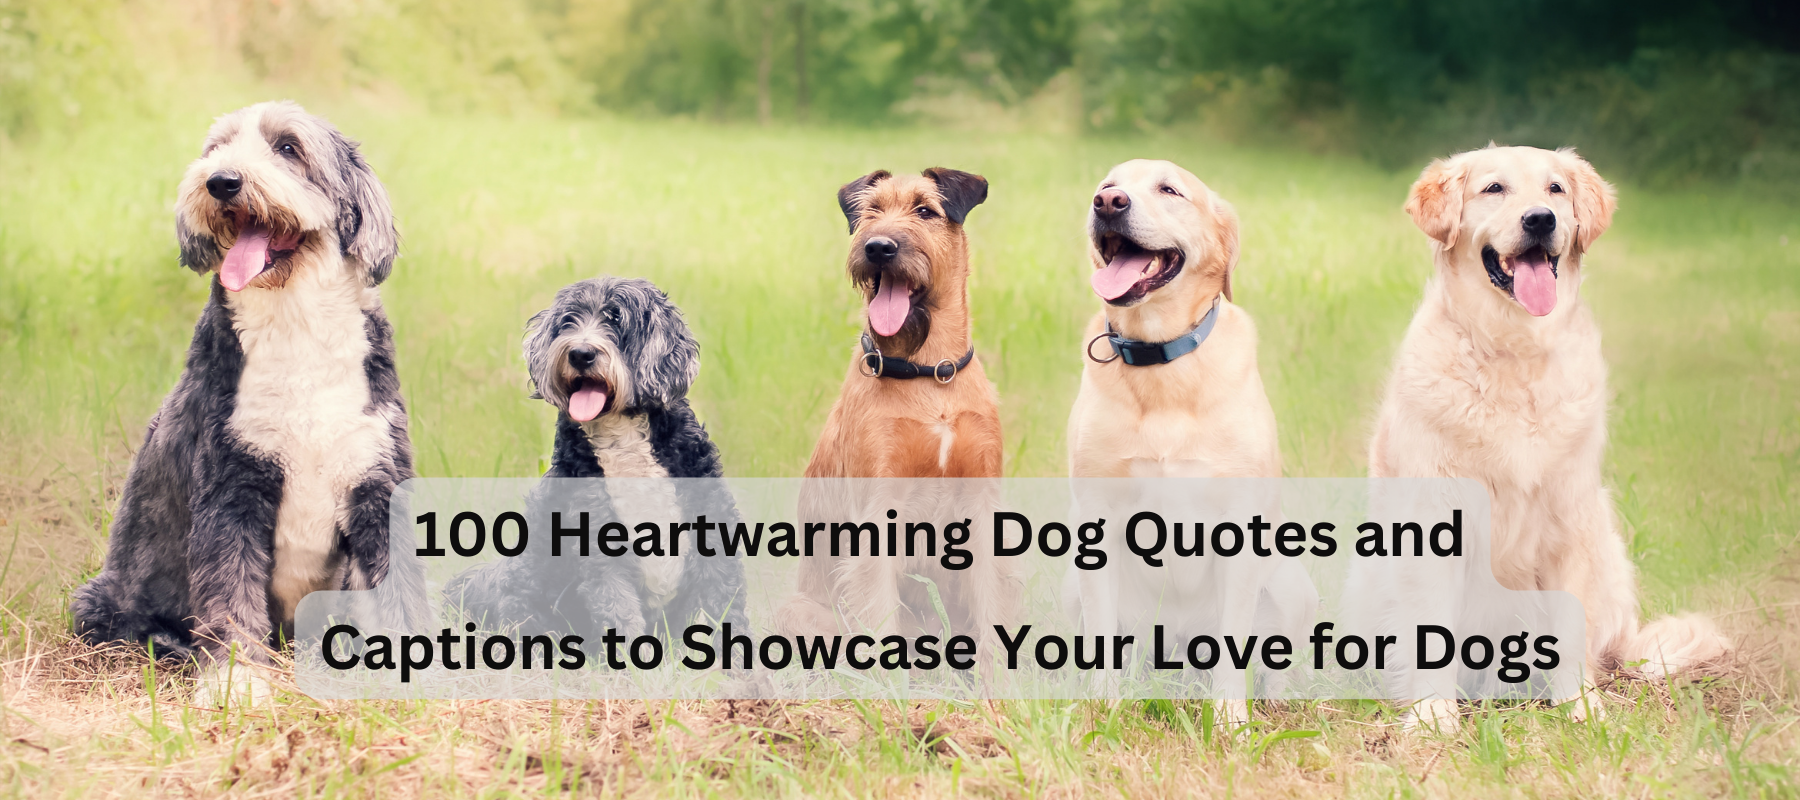 Man's Best Friend: 100 Heartwarming Dog Quotes and Captions to Showcase Your Love for Dogs